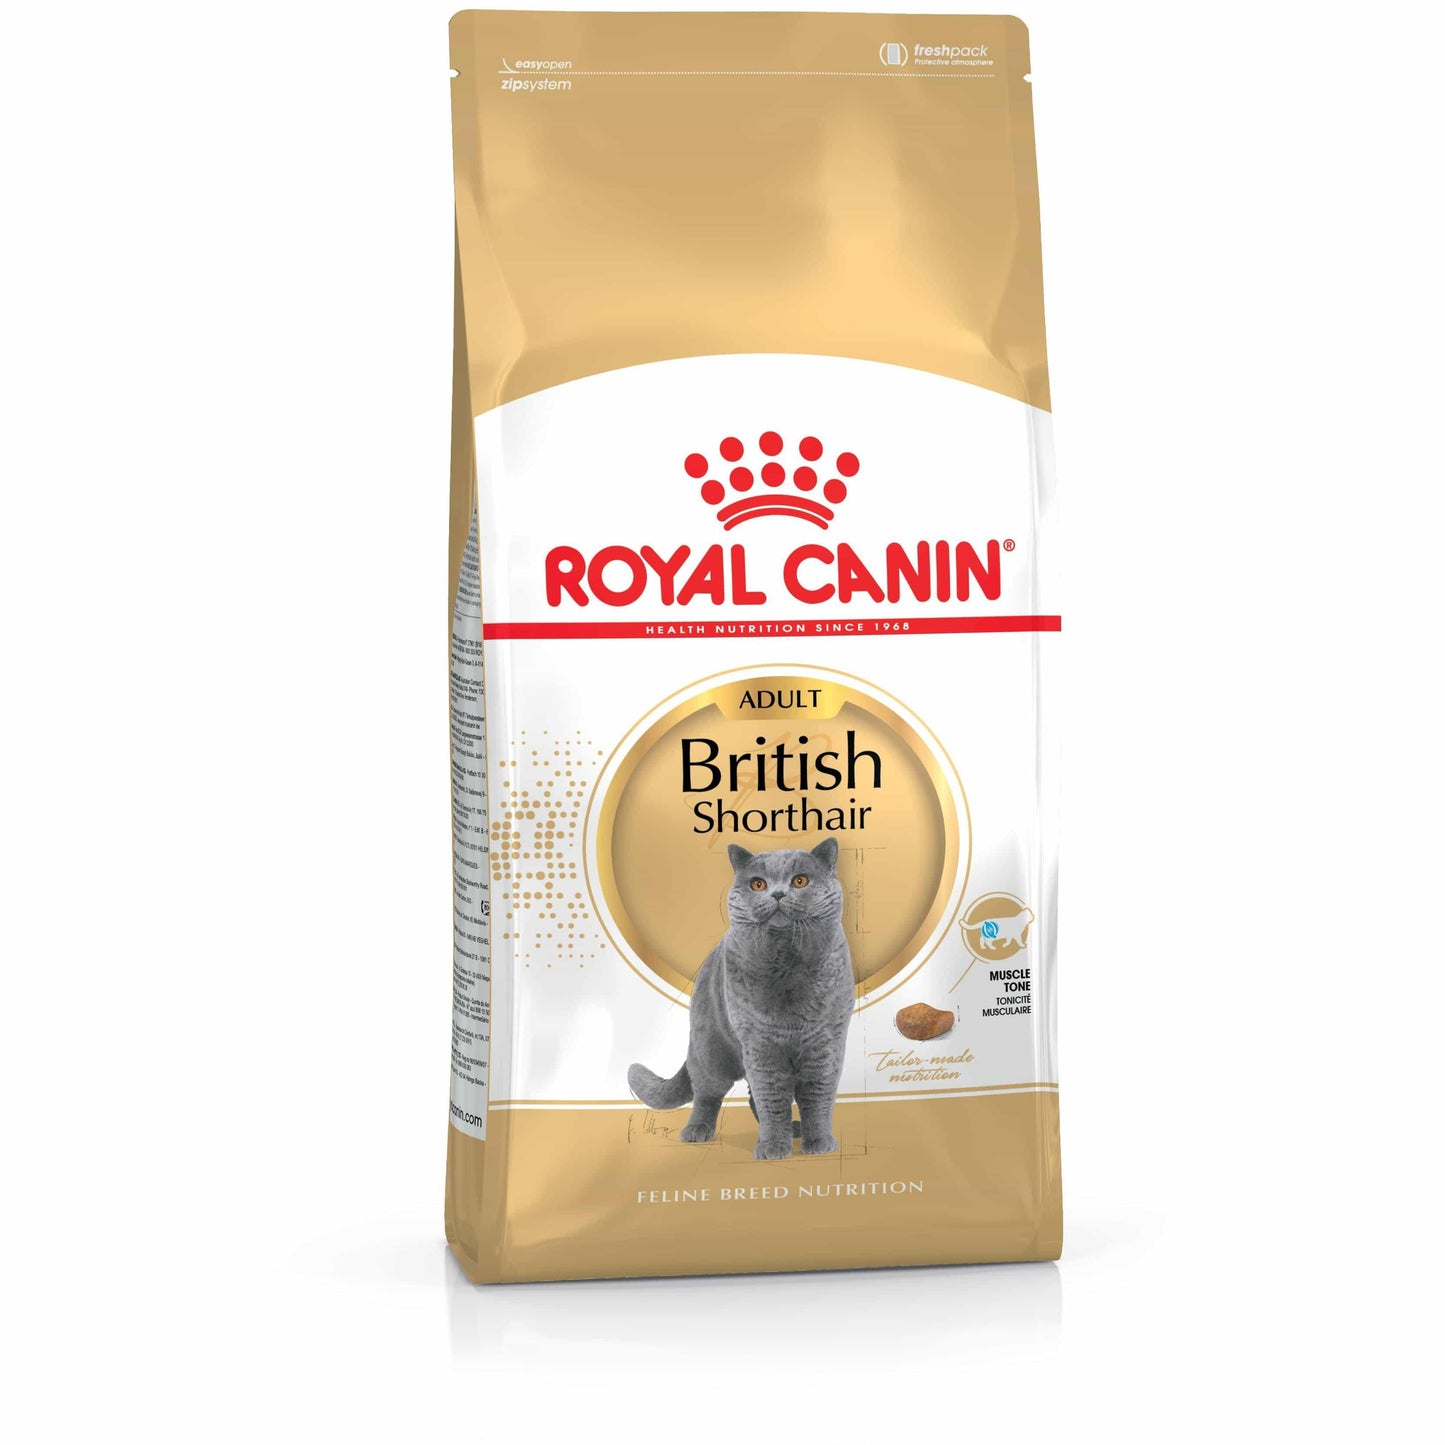 Royal Canin British Shorthaired Dry Cat Food